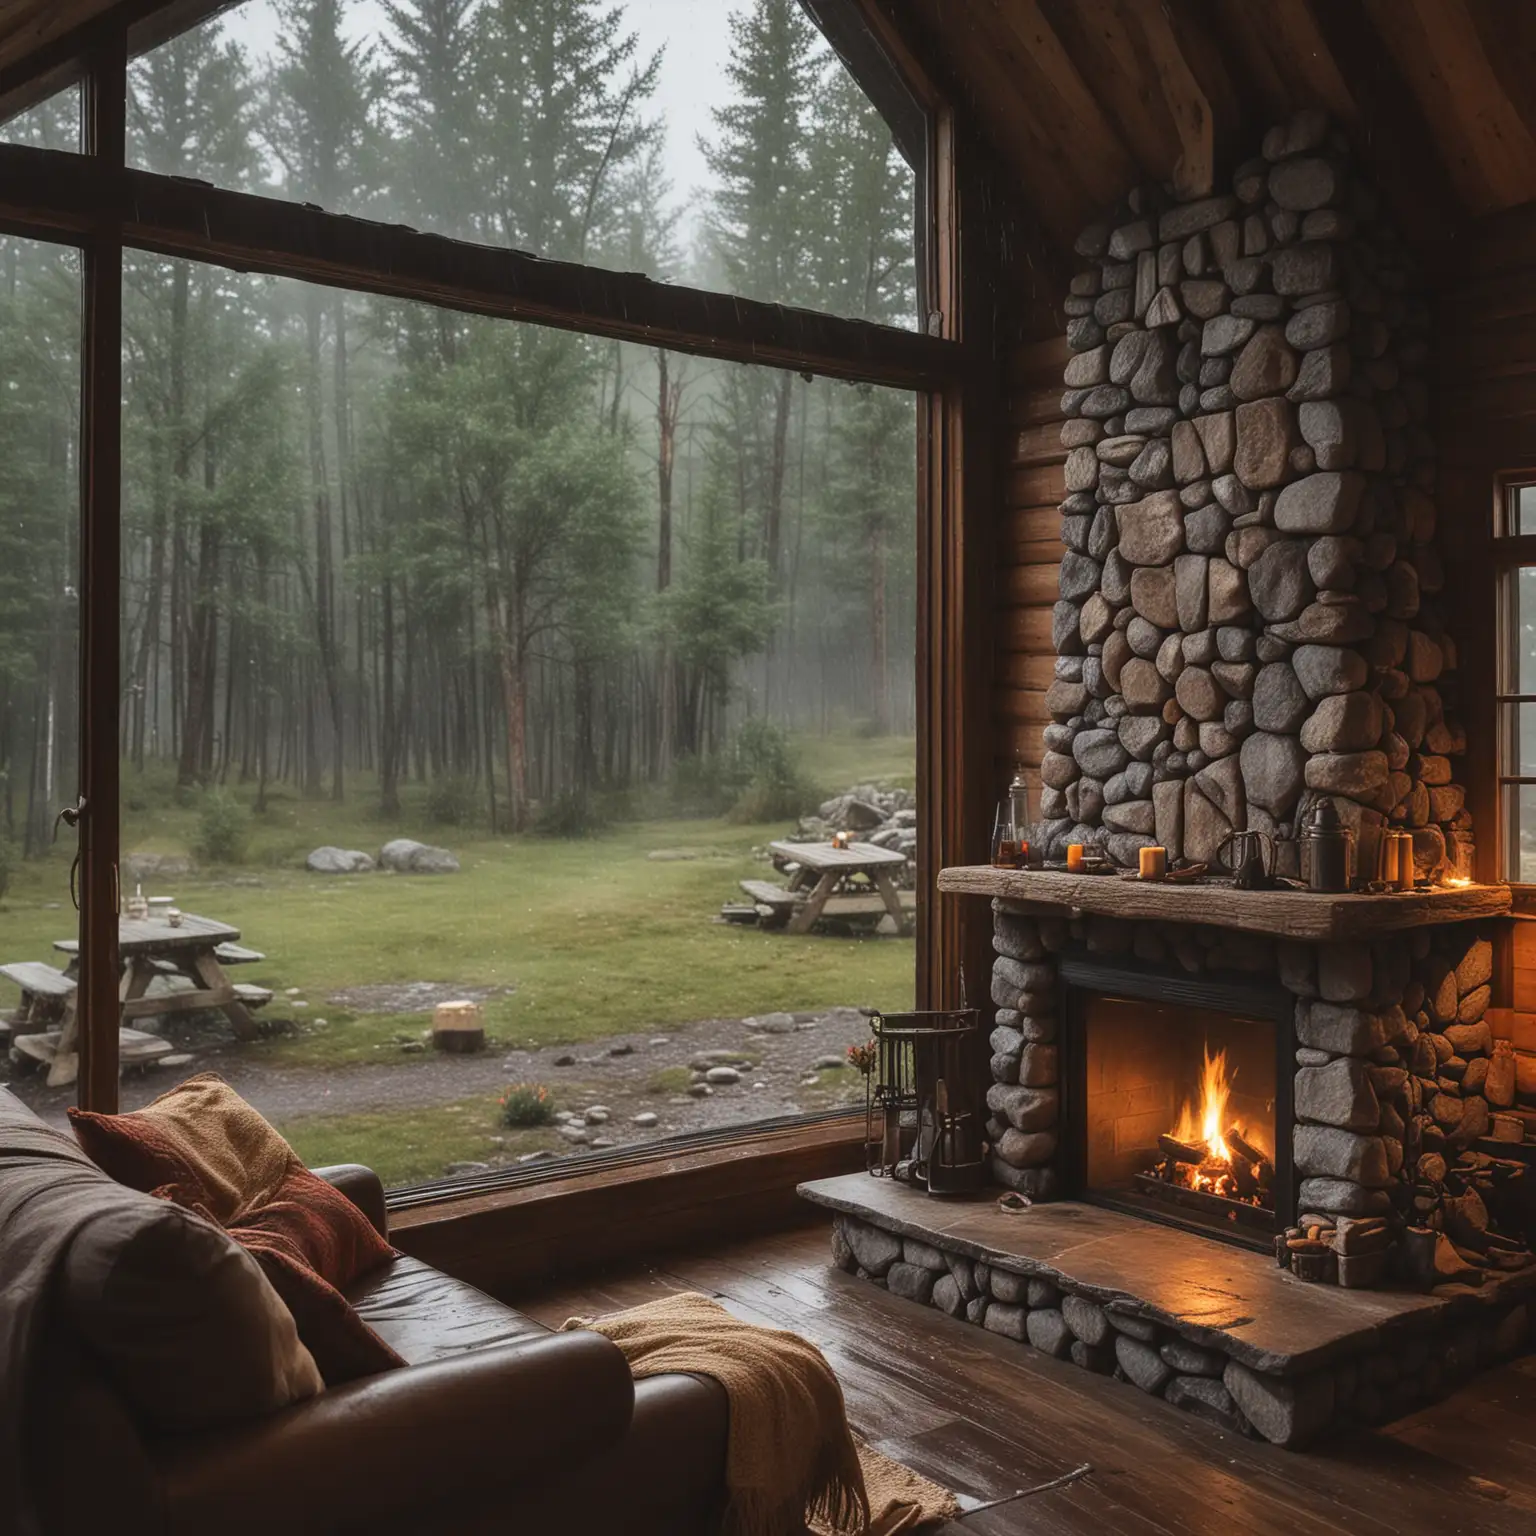 Cozy Cabin Interior with Fireplace and Rainy Window View